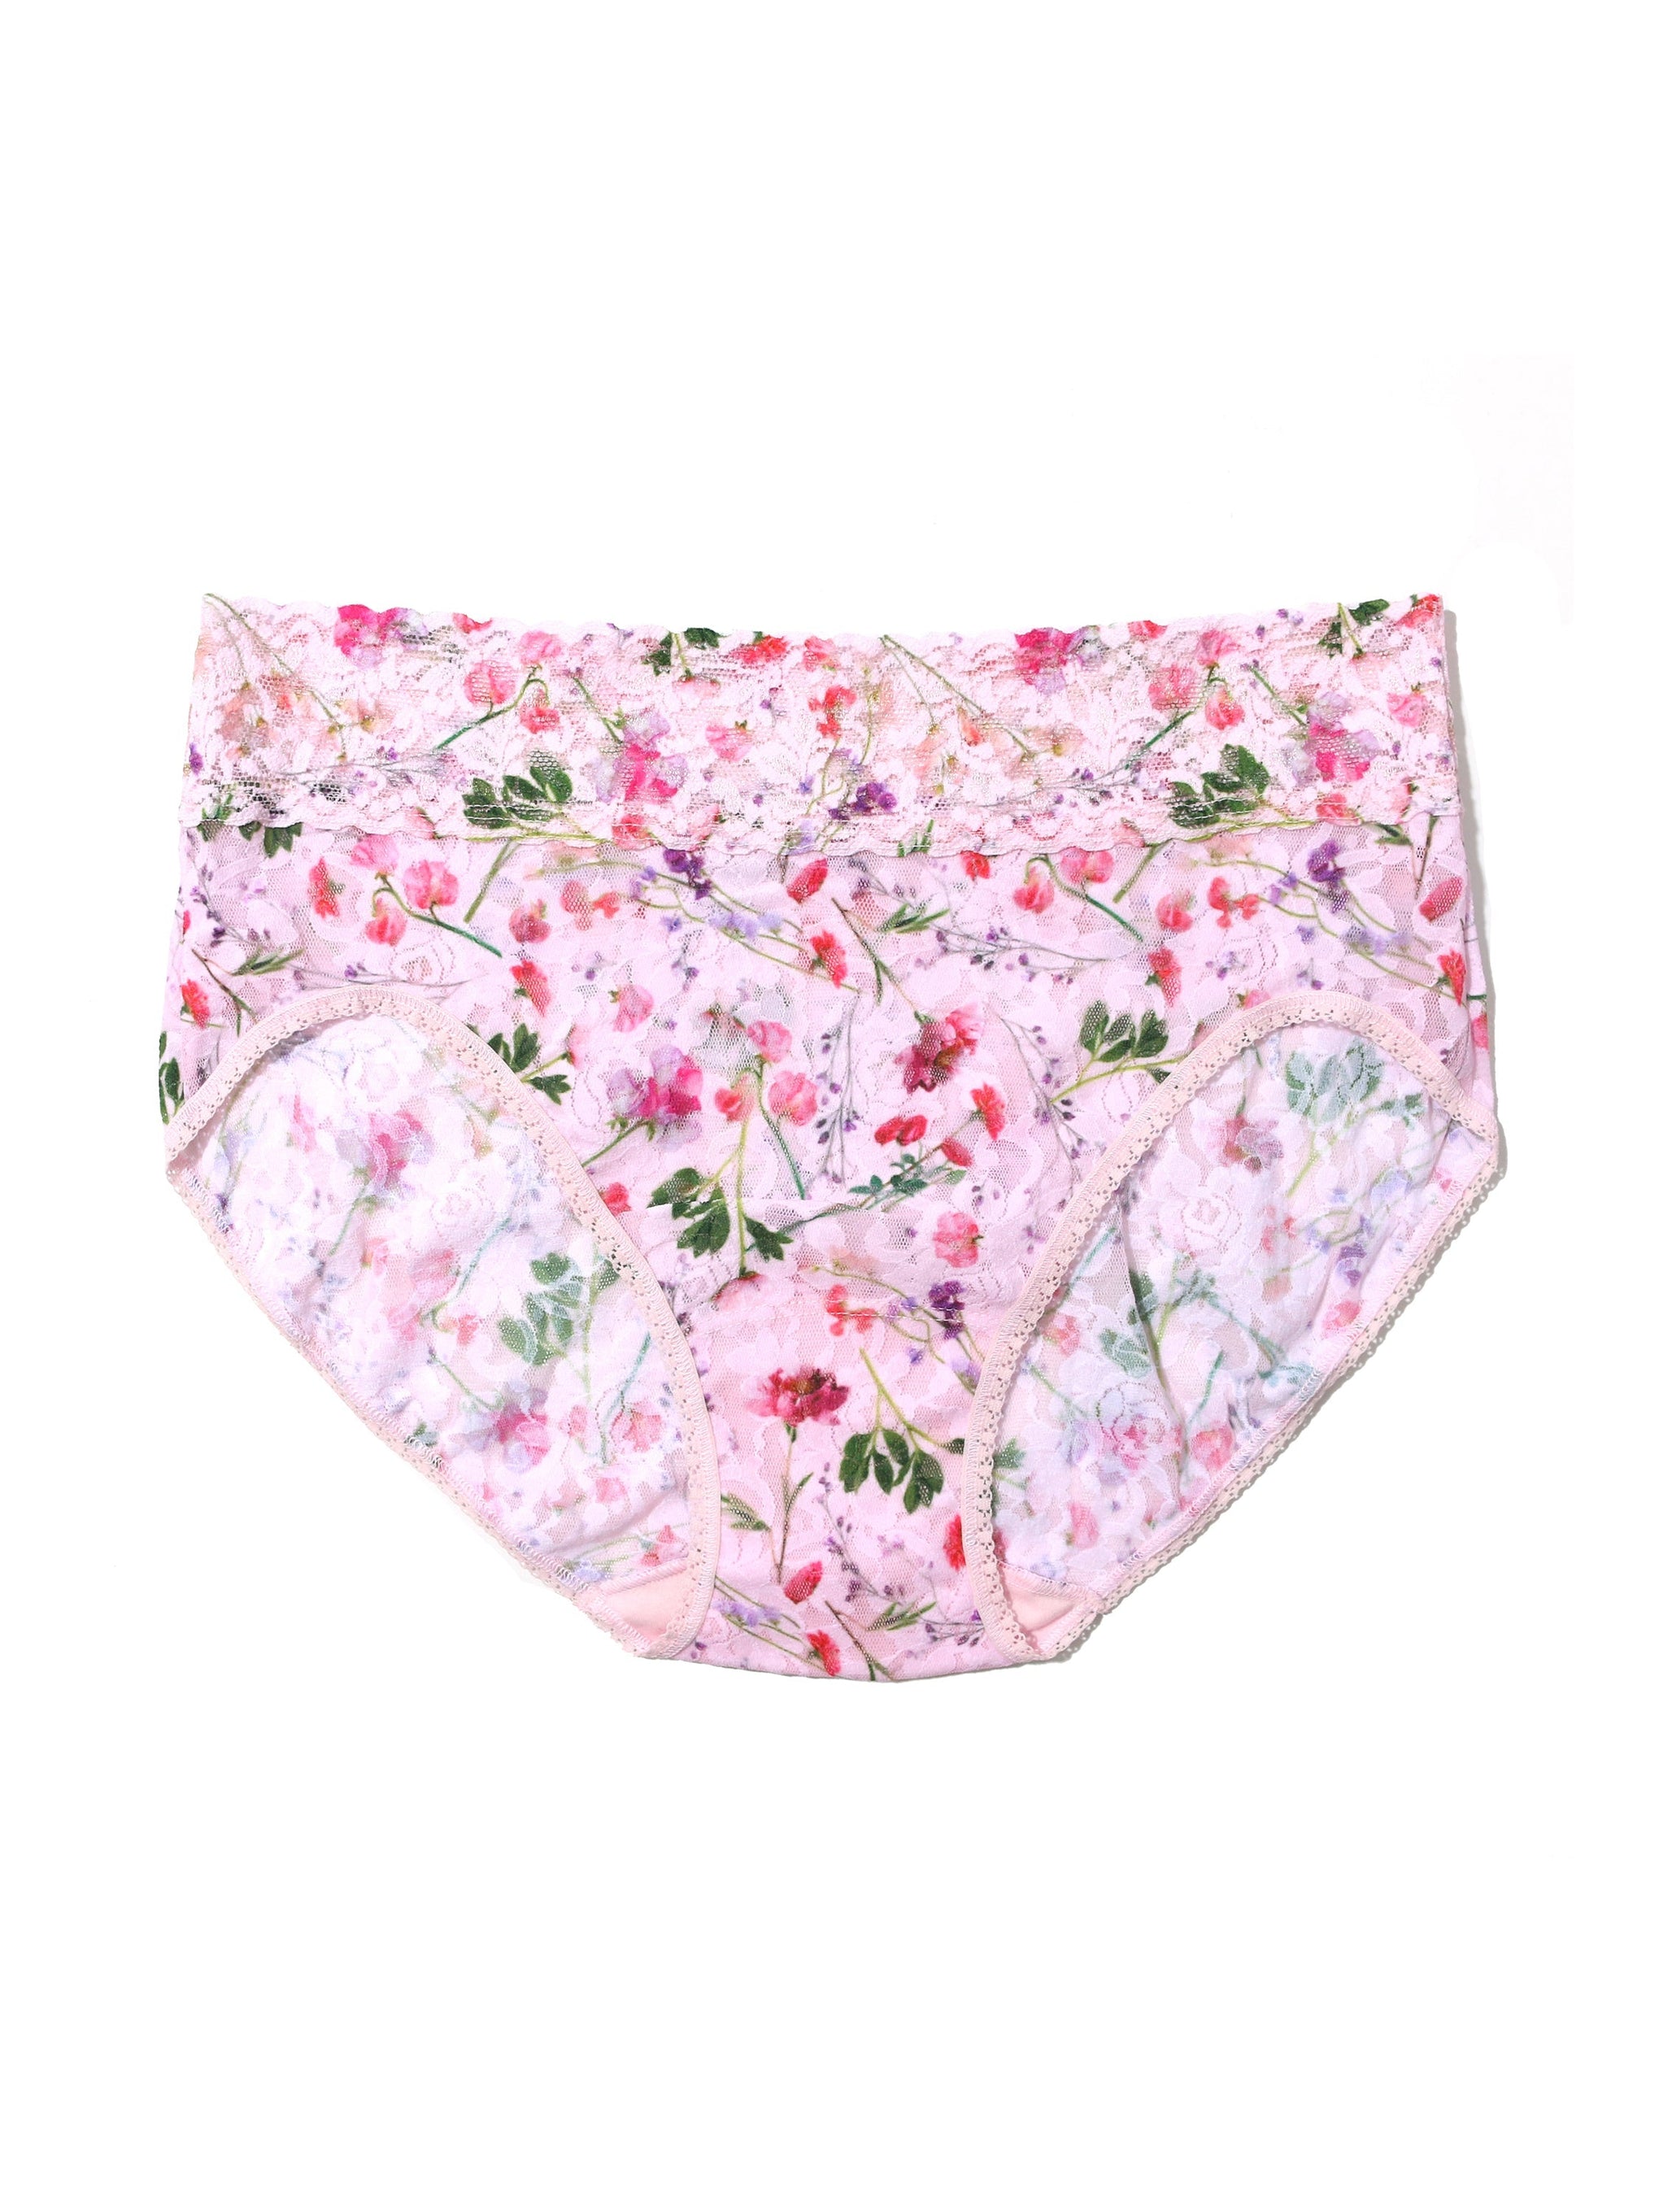 Printed Signature Lace French Brief Rise And Vines Sale